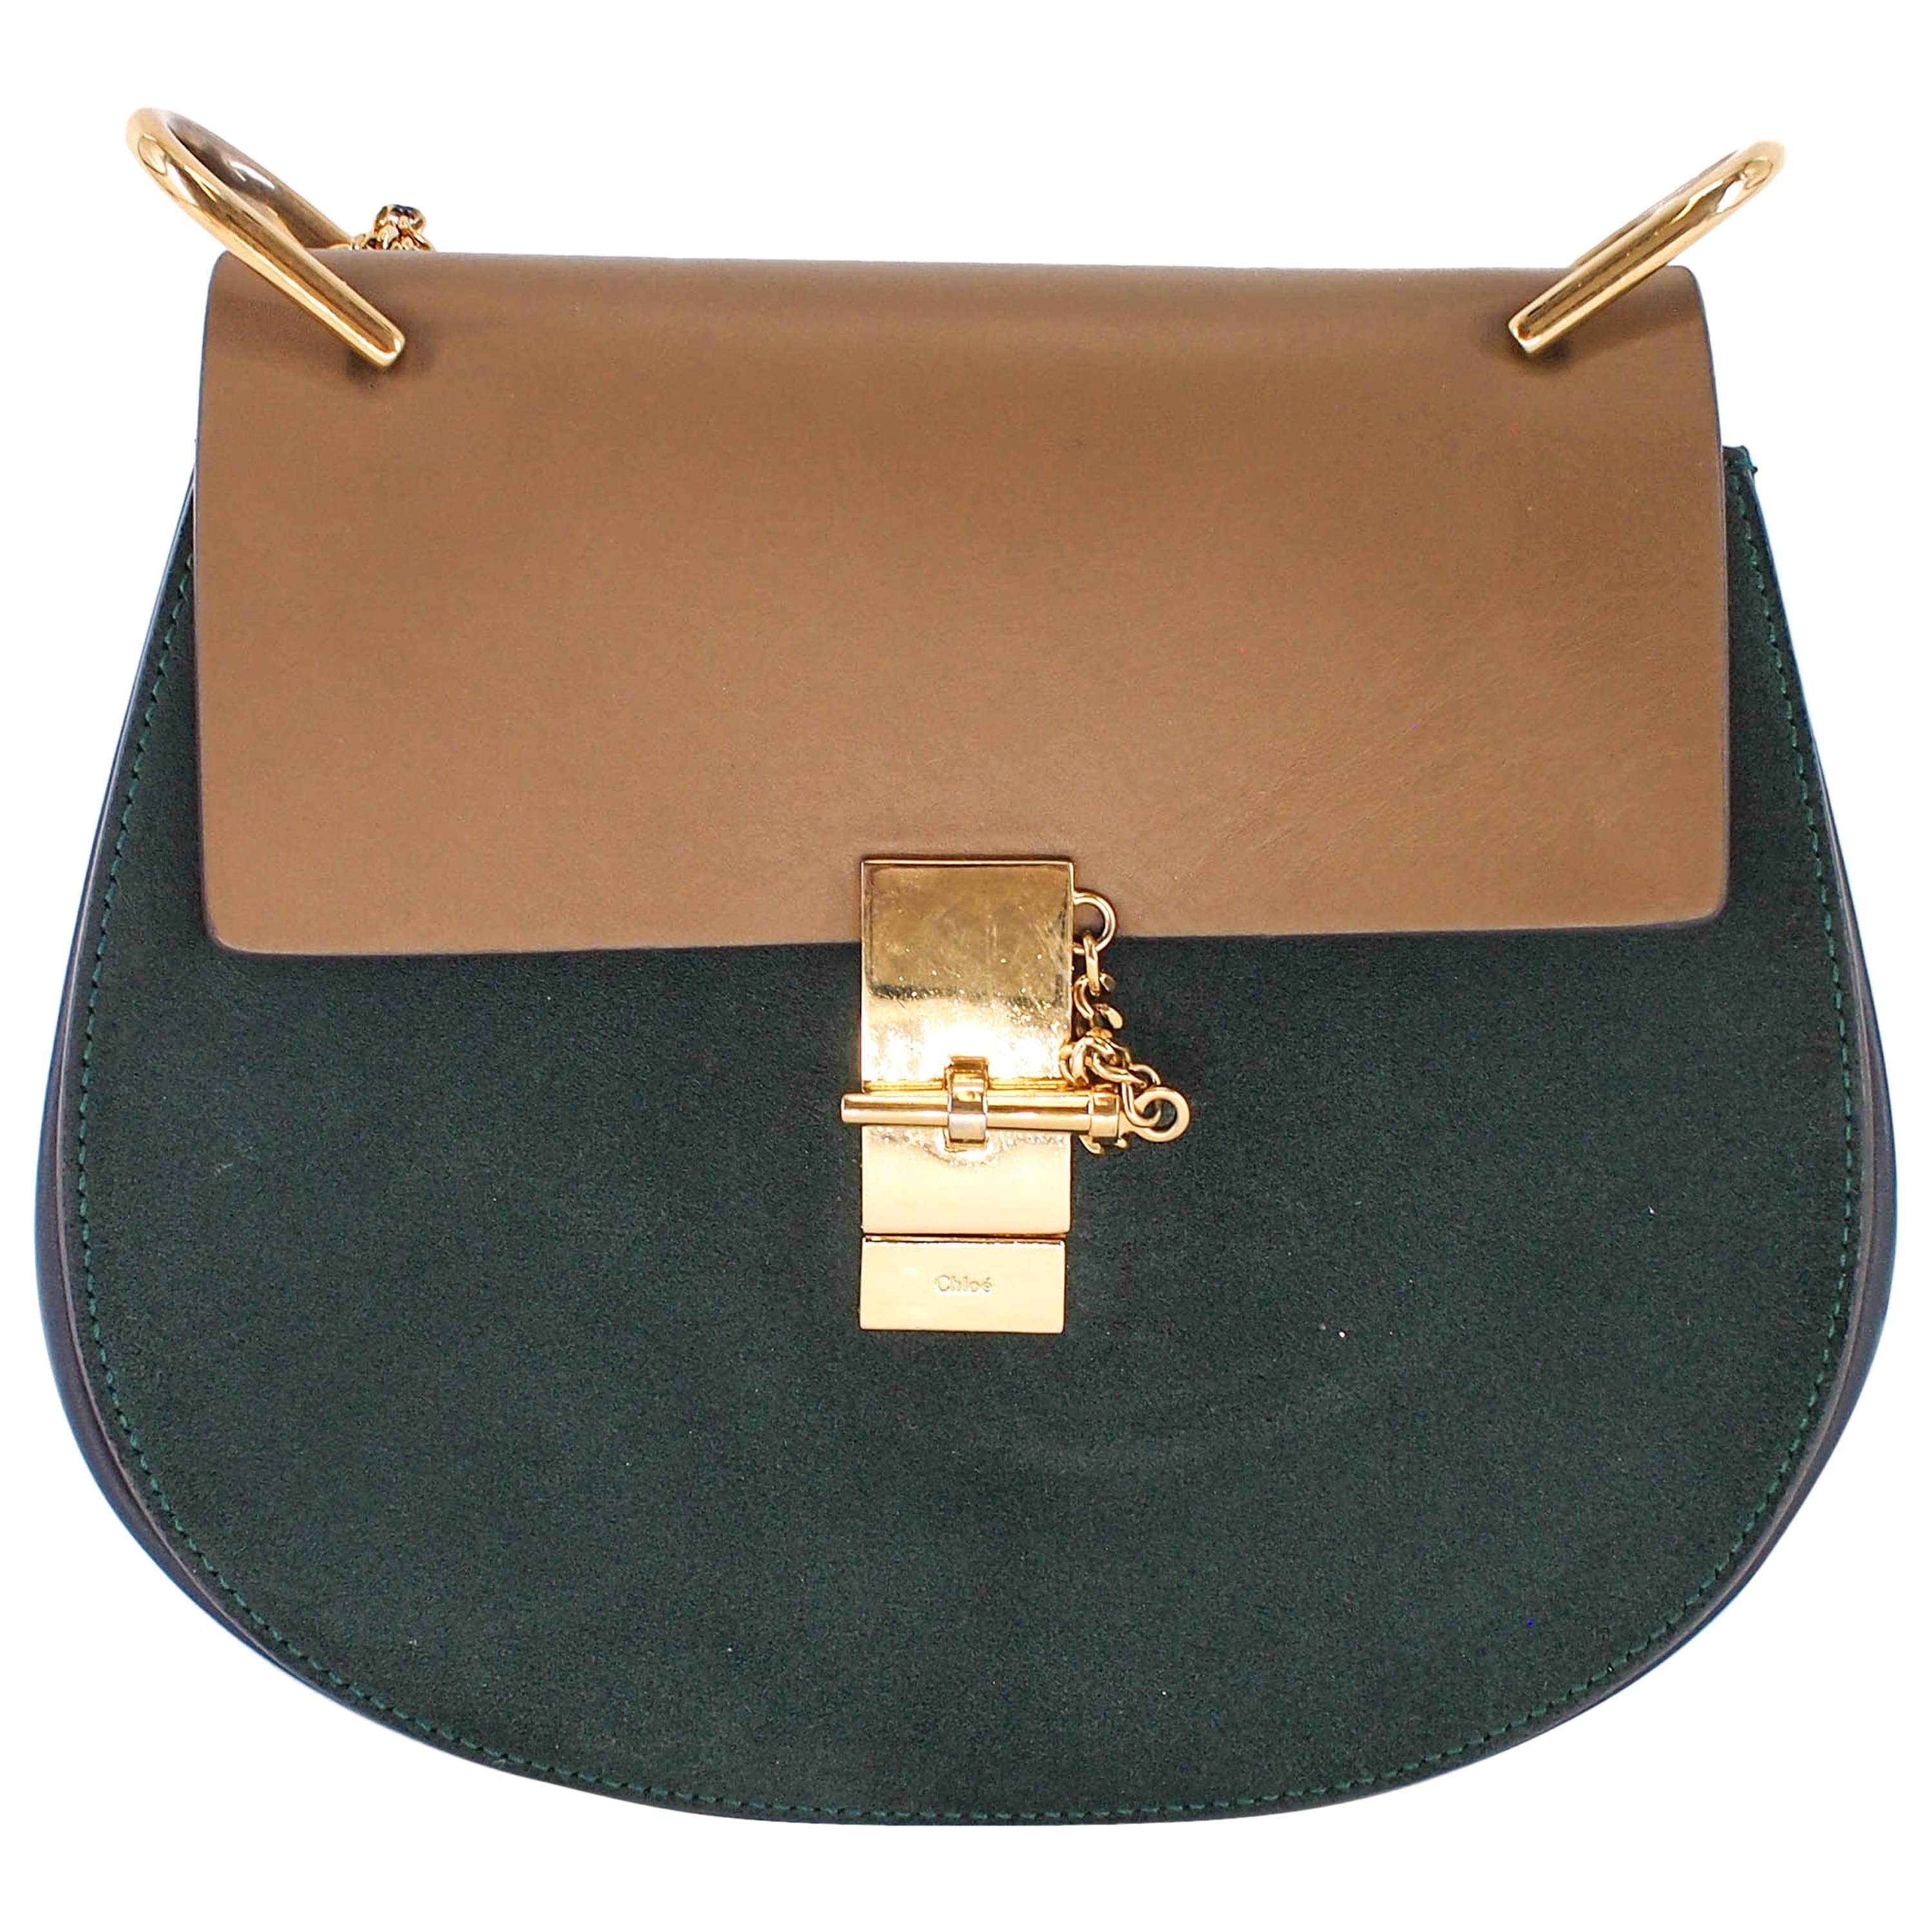 Chloe Medium Drew Shoulder Bag in Tri Colour Leather and Suede w/ Gold Hardware For Sale